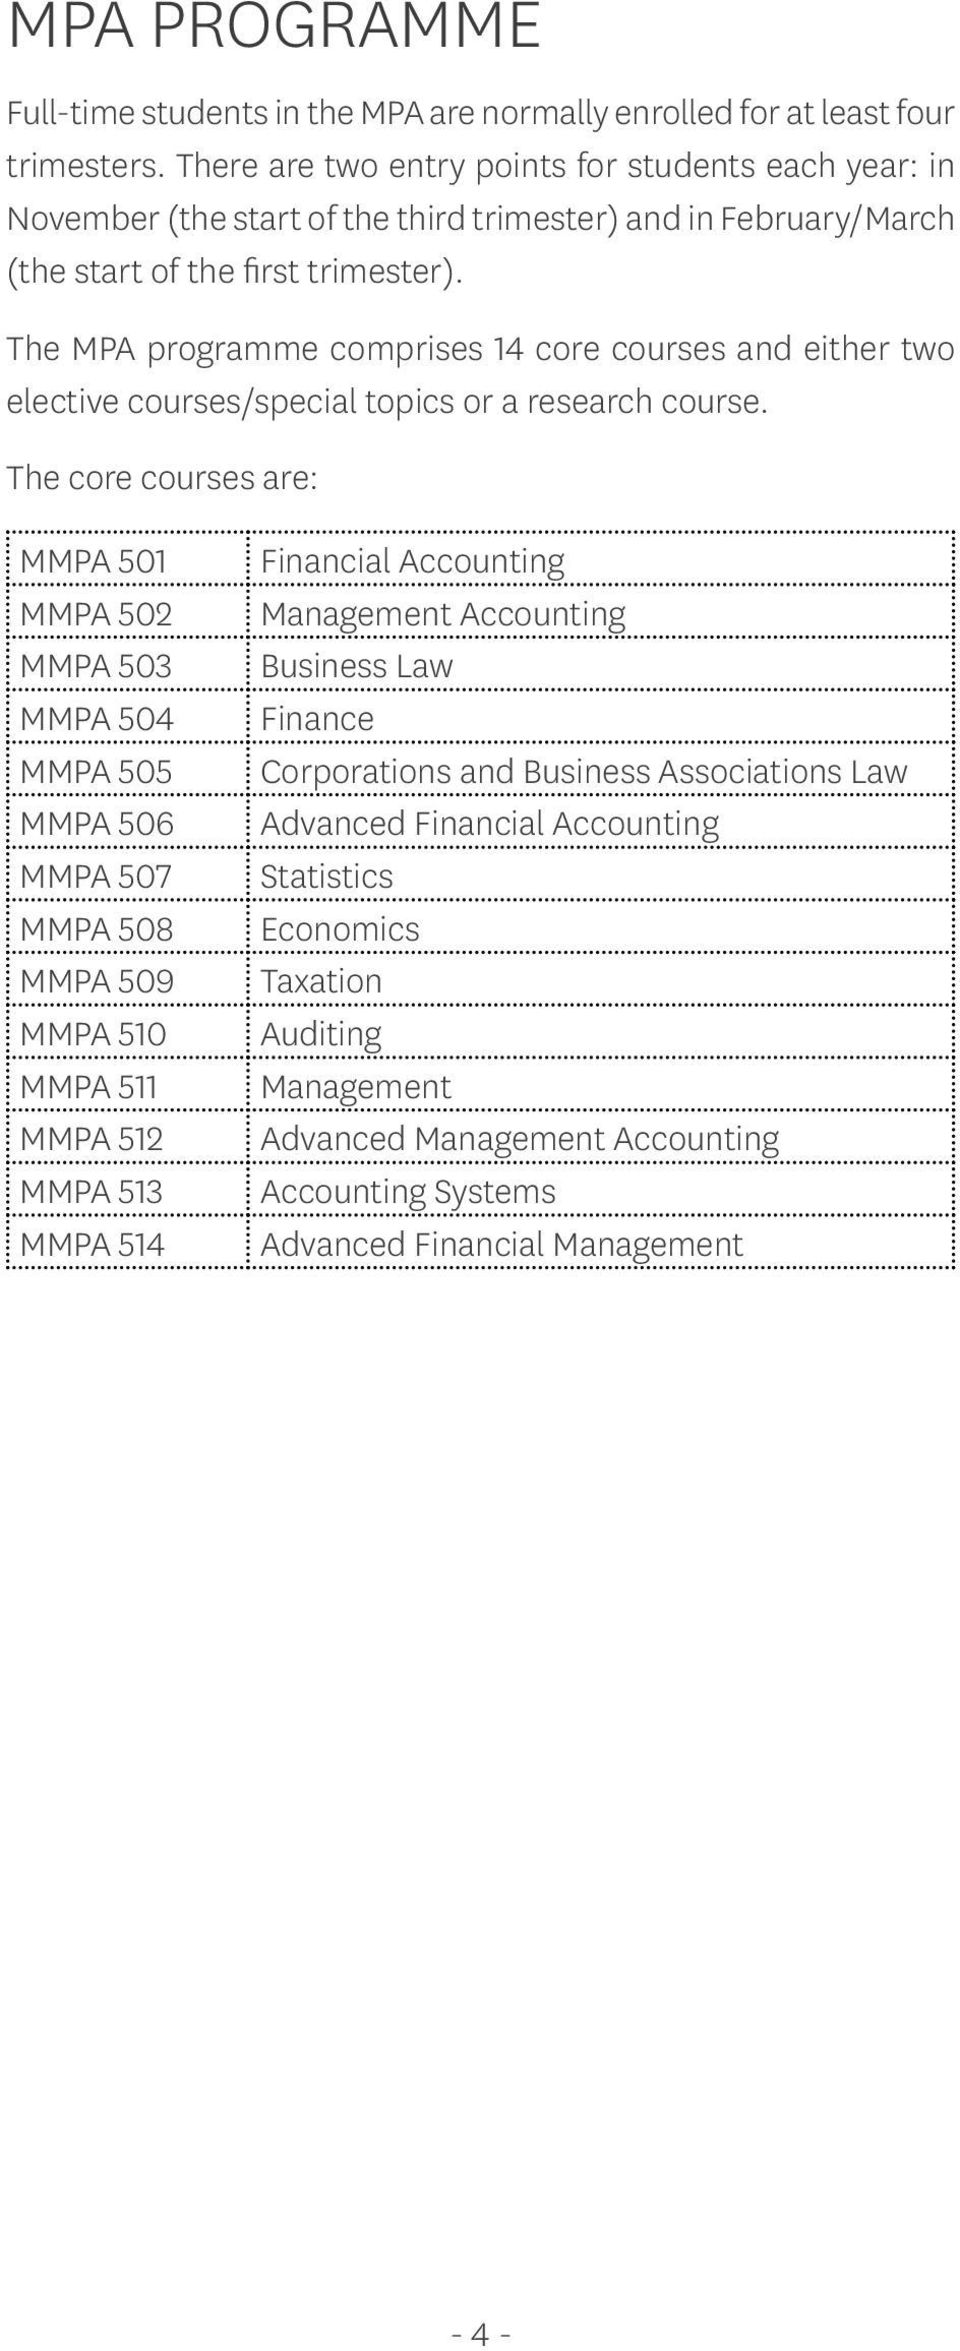 The MPA programme comprises 14 core courses and either two elective courses/special topics or a research course.